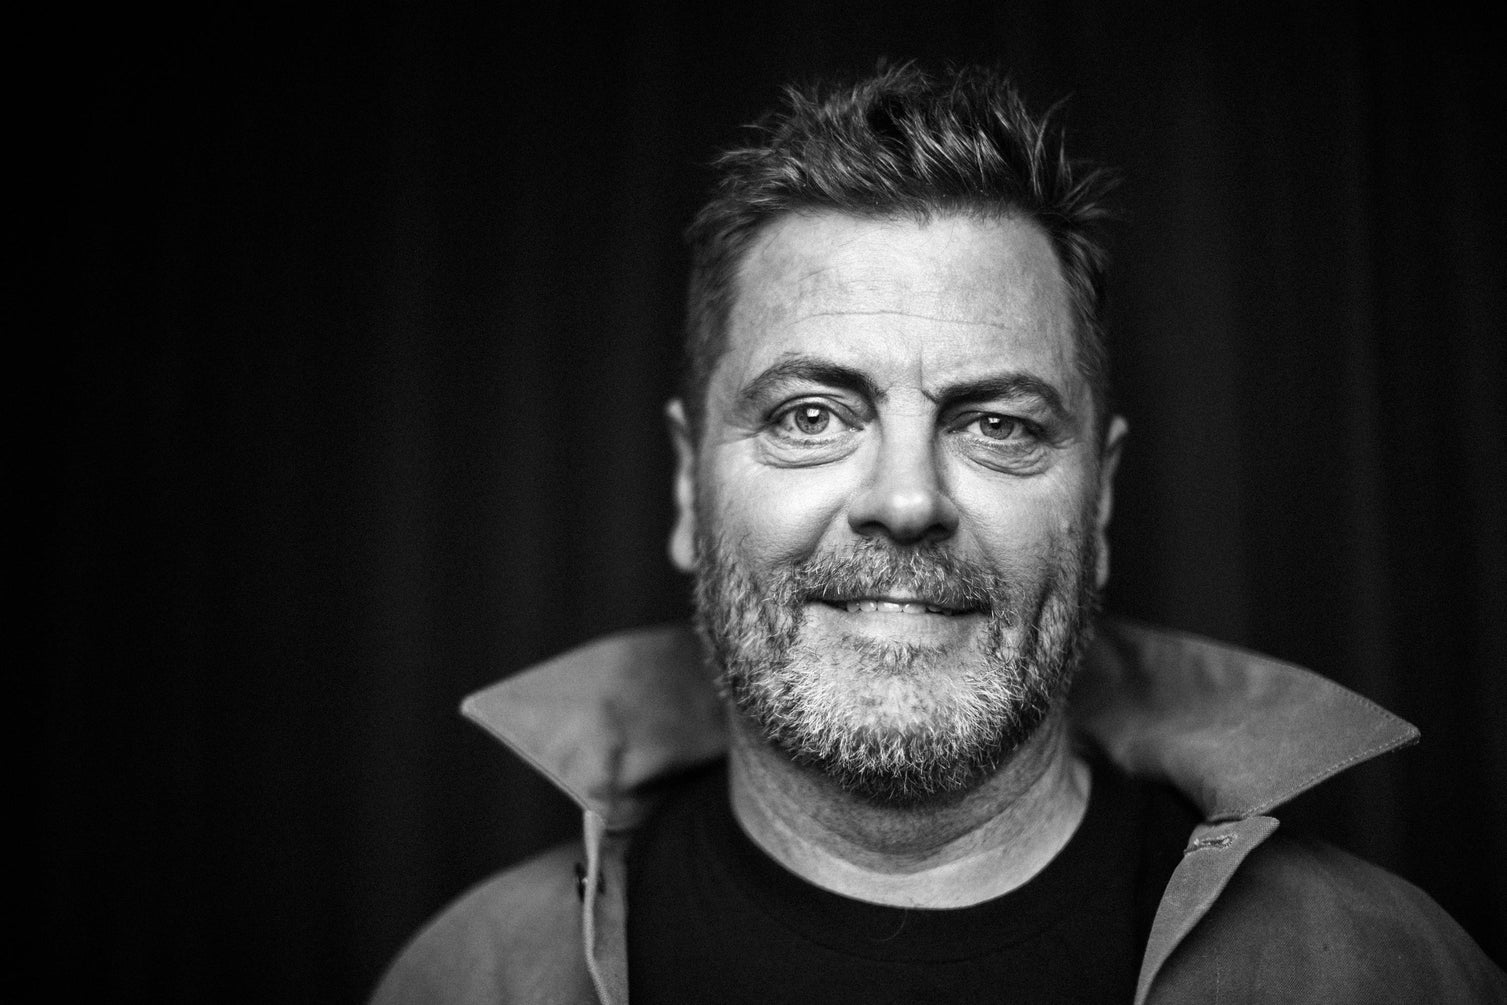 The Last of Us adds Nick Offerman